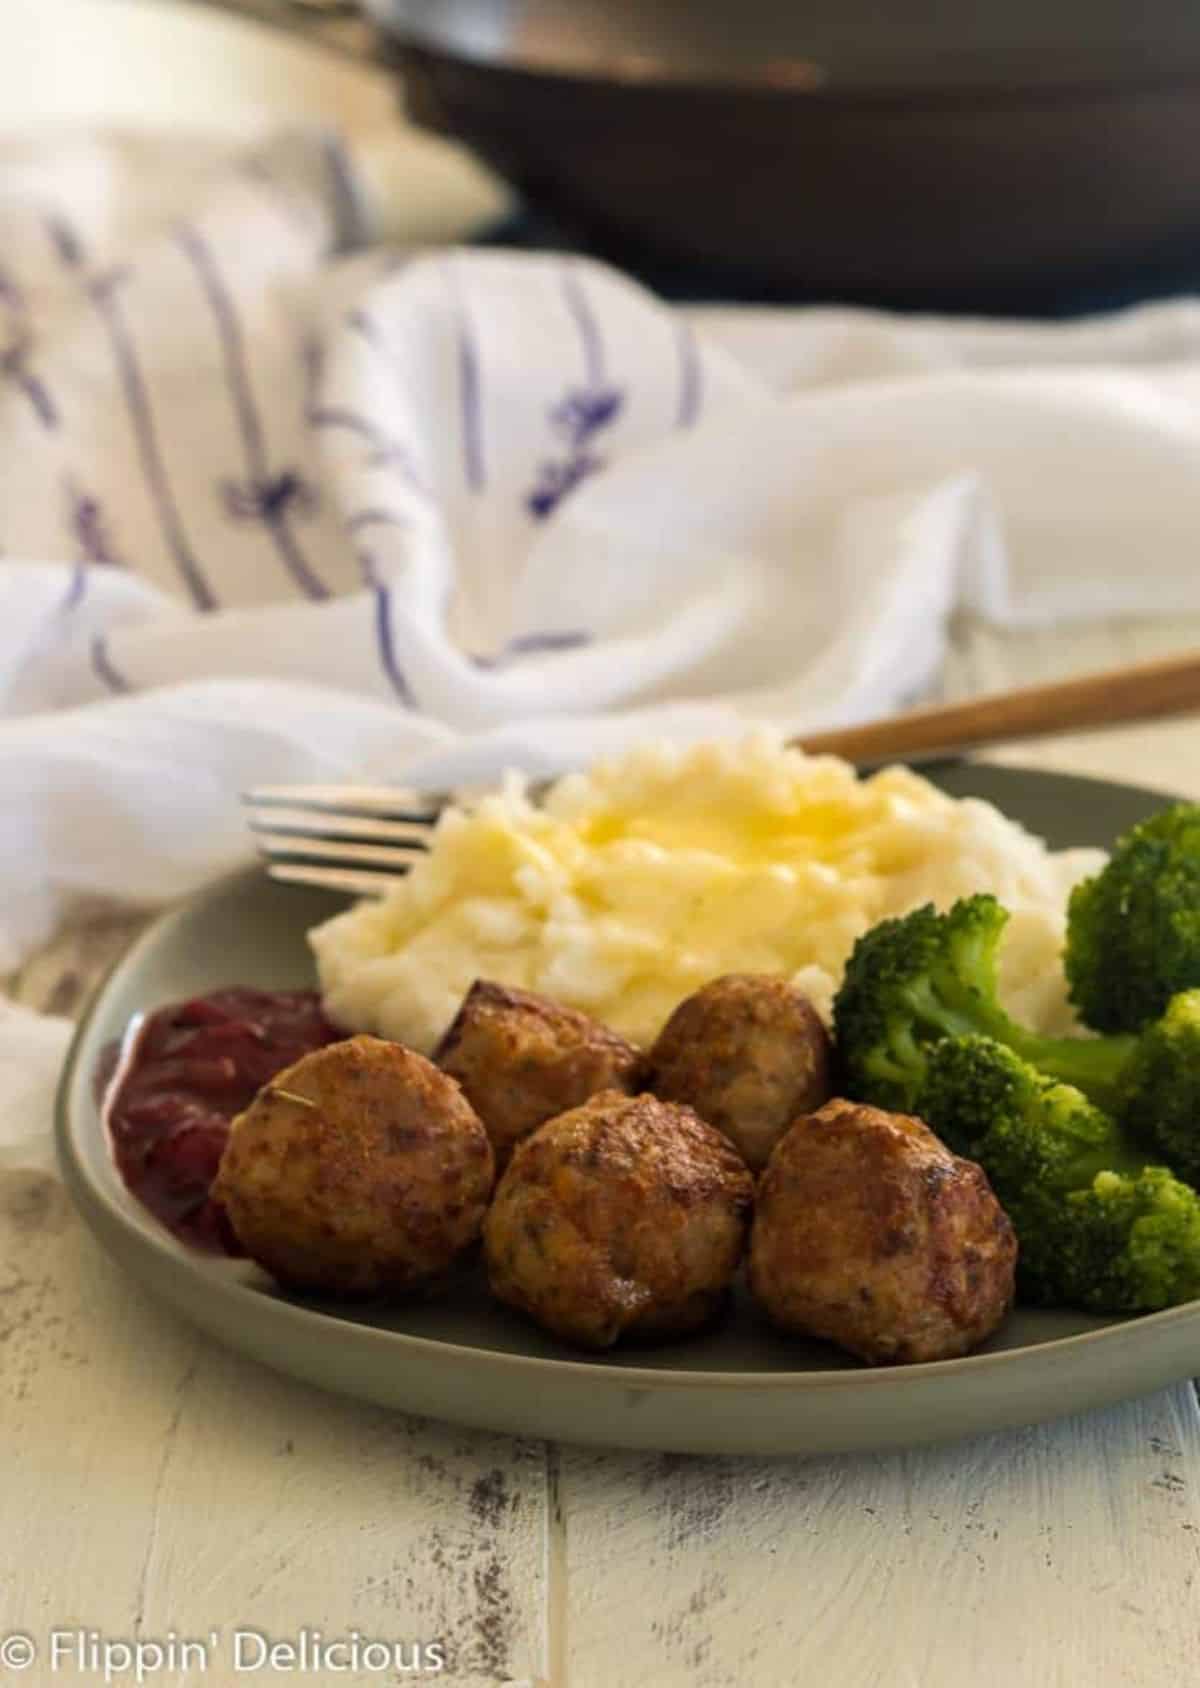 Delicious Meatballs with mashed potatoes and broccoli on a gray plate.